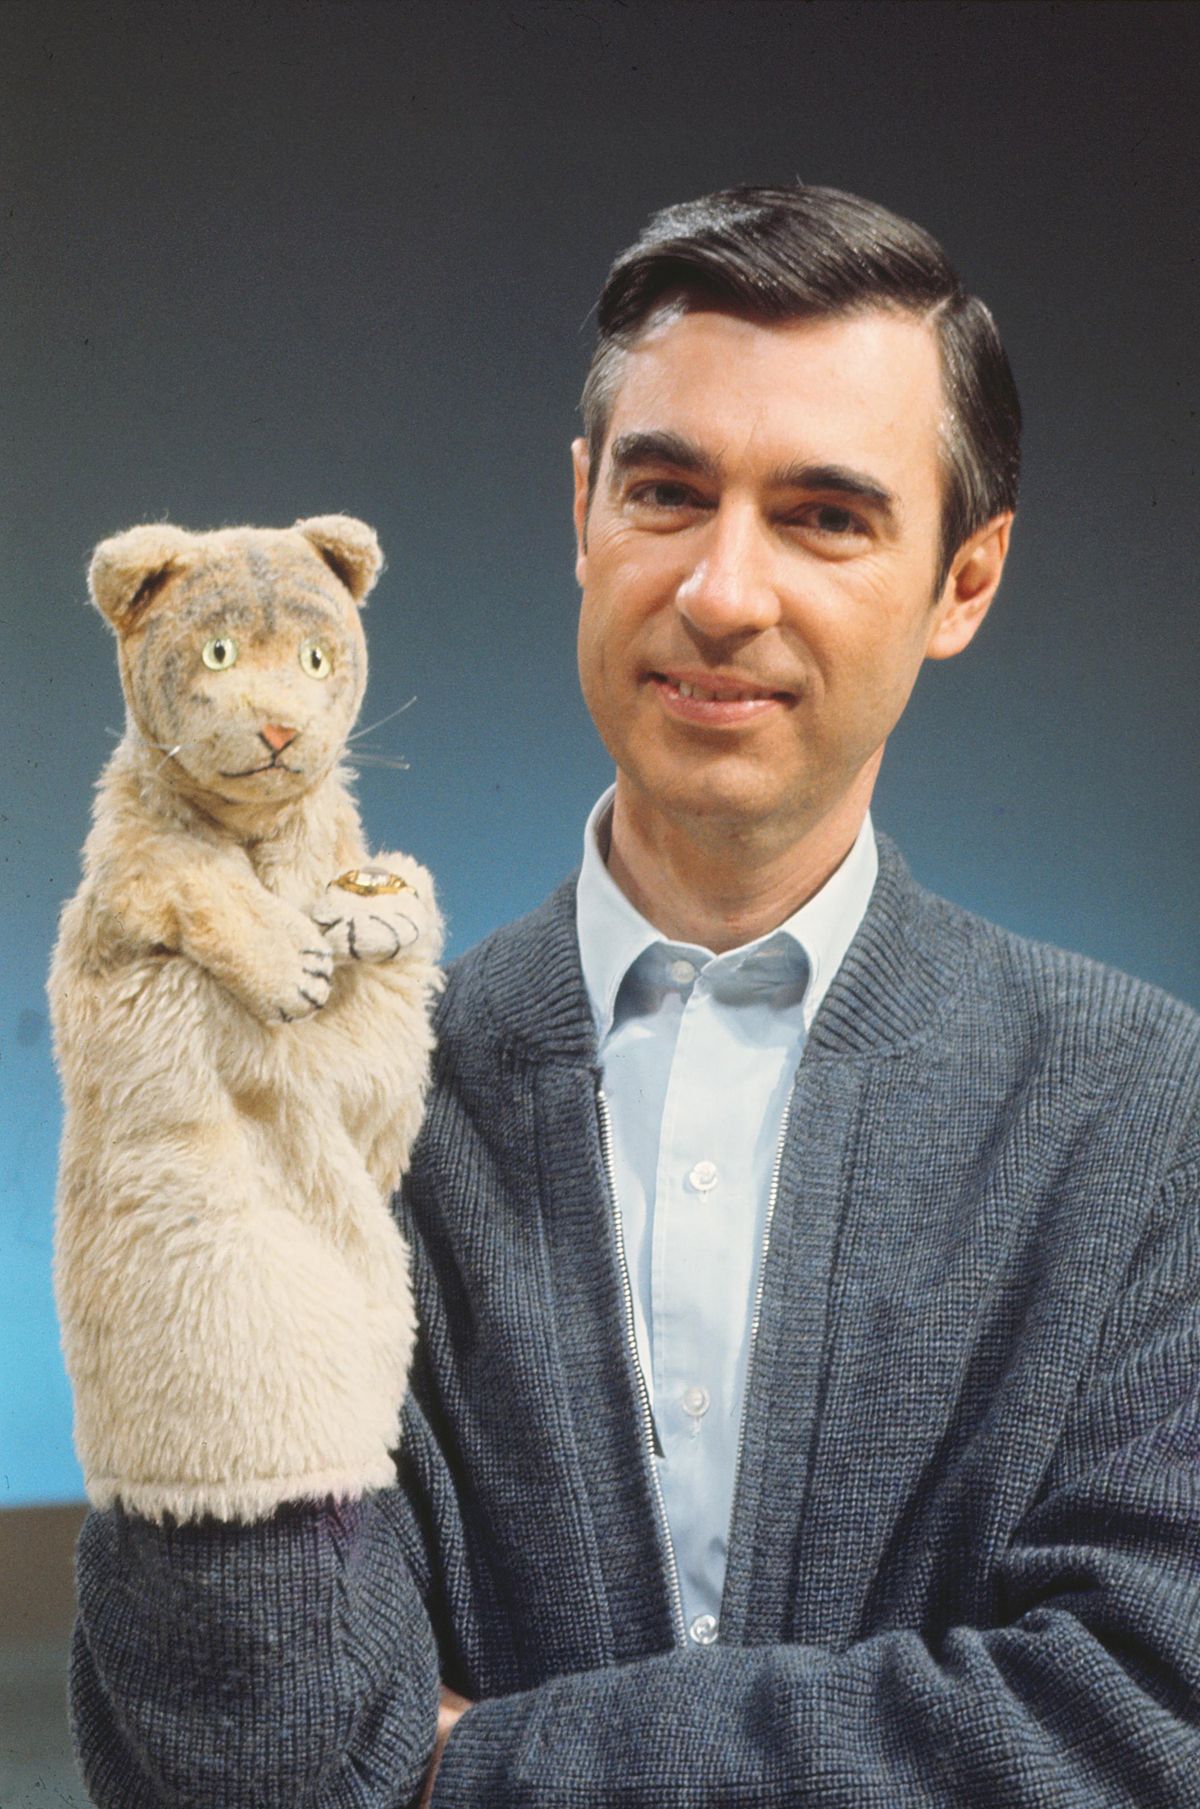 Fred Rogers of "Mr. Rogers Neighborhood" in a scene from the film "Won